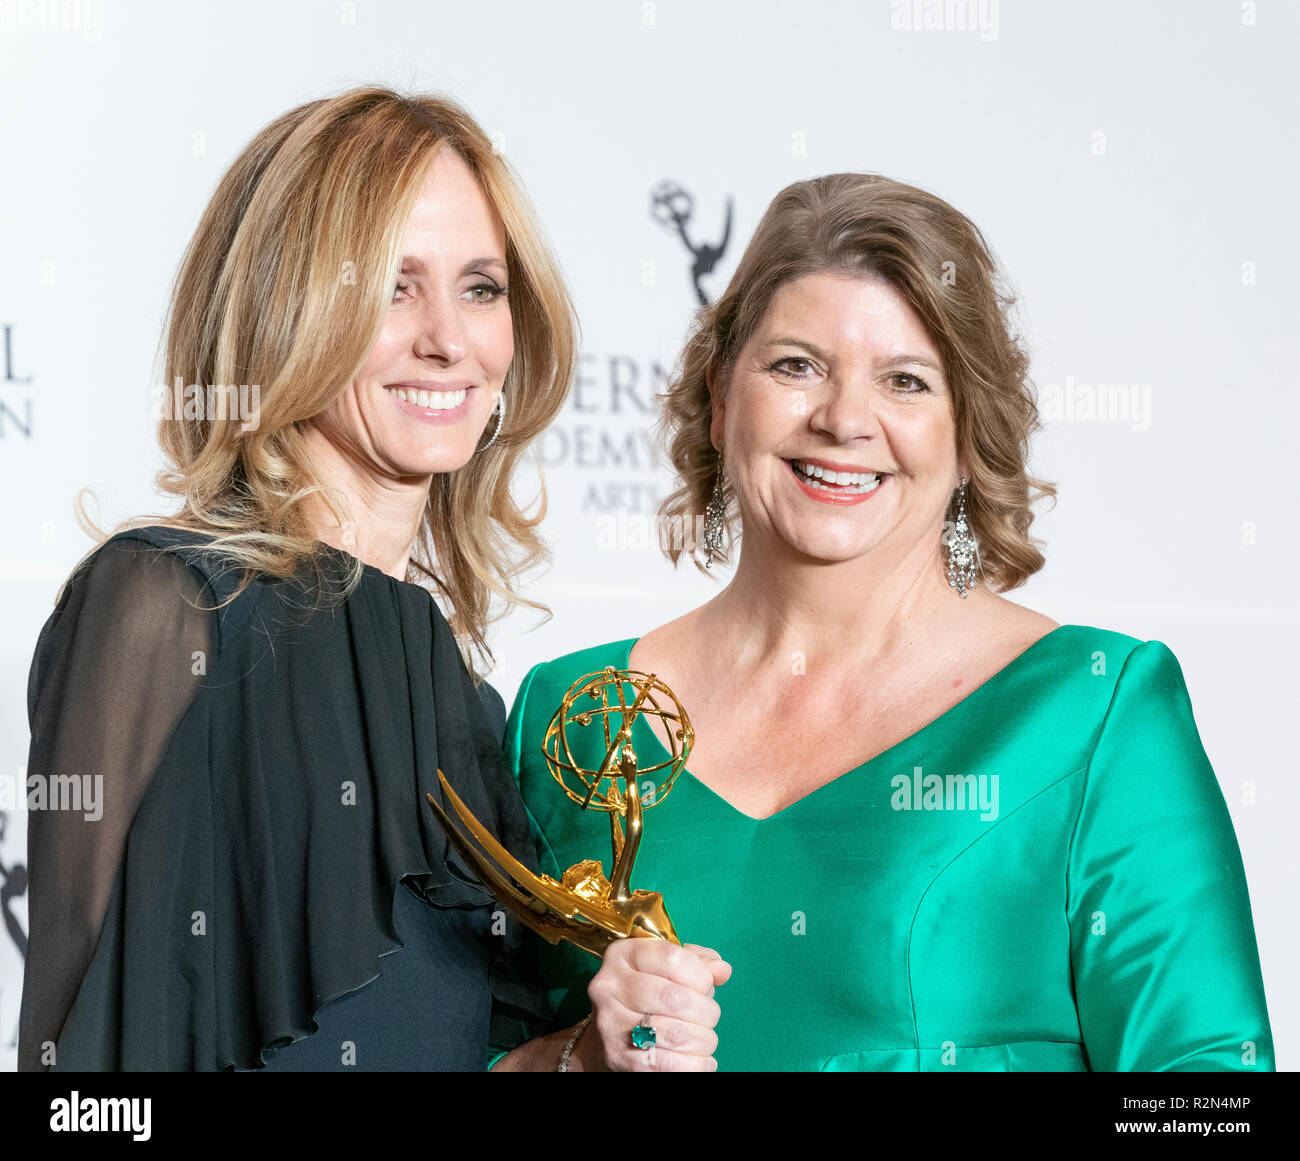 New York, United States. 19th Nov, 2018. New York, NY - November 19, 2018: Sophie Turner Laing winner of the Directorate Award poses with Dana Walden during the 46th International Emmy Awards at Hilton hotel Credit: lev radin/Alamy Live News Stock Photo